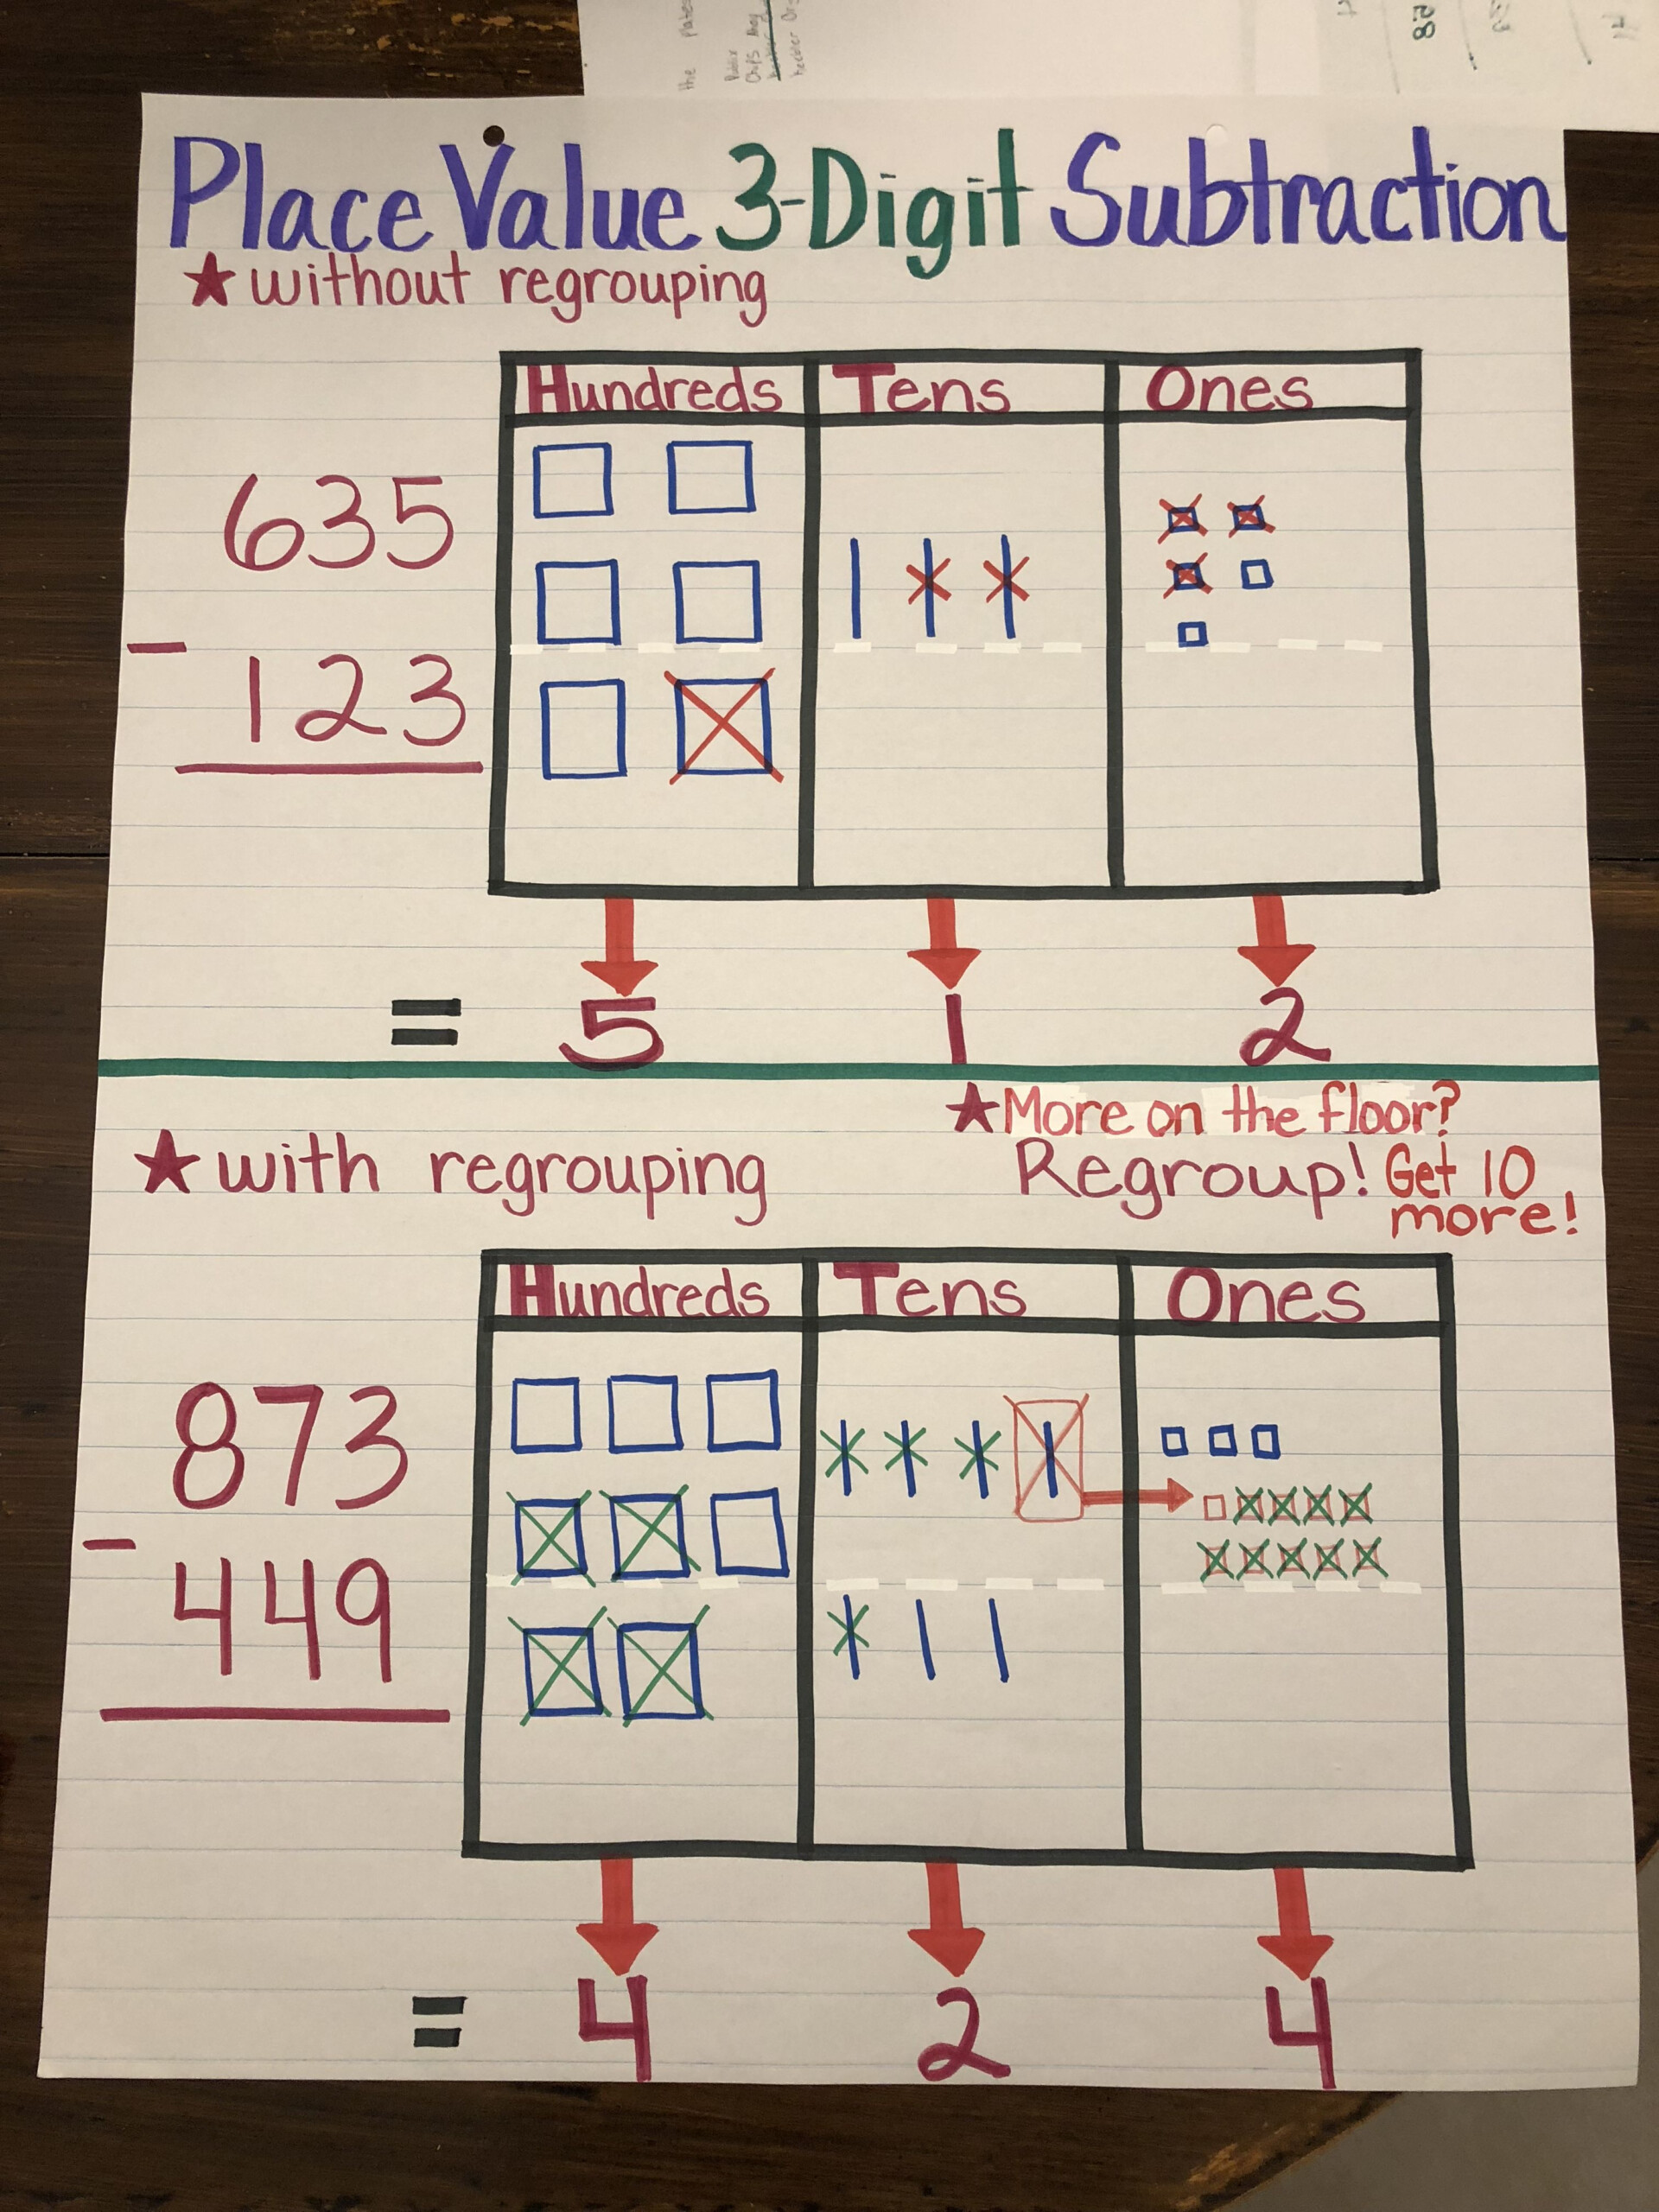 Place Value Chart 3-Digit Subtraction With And Without